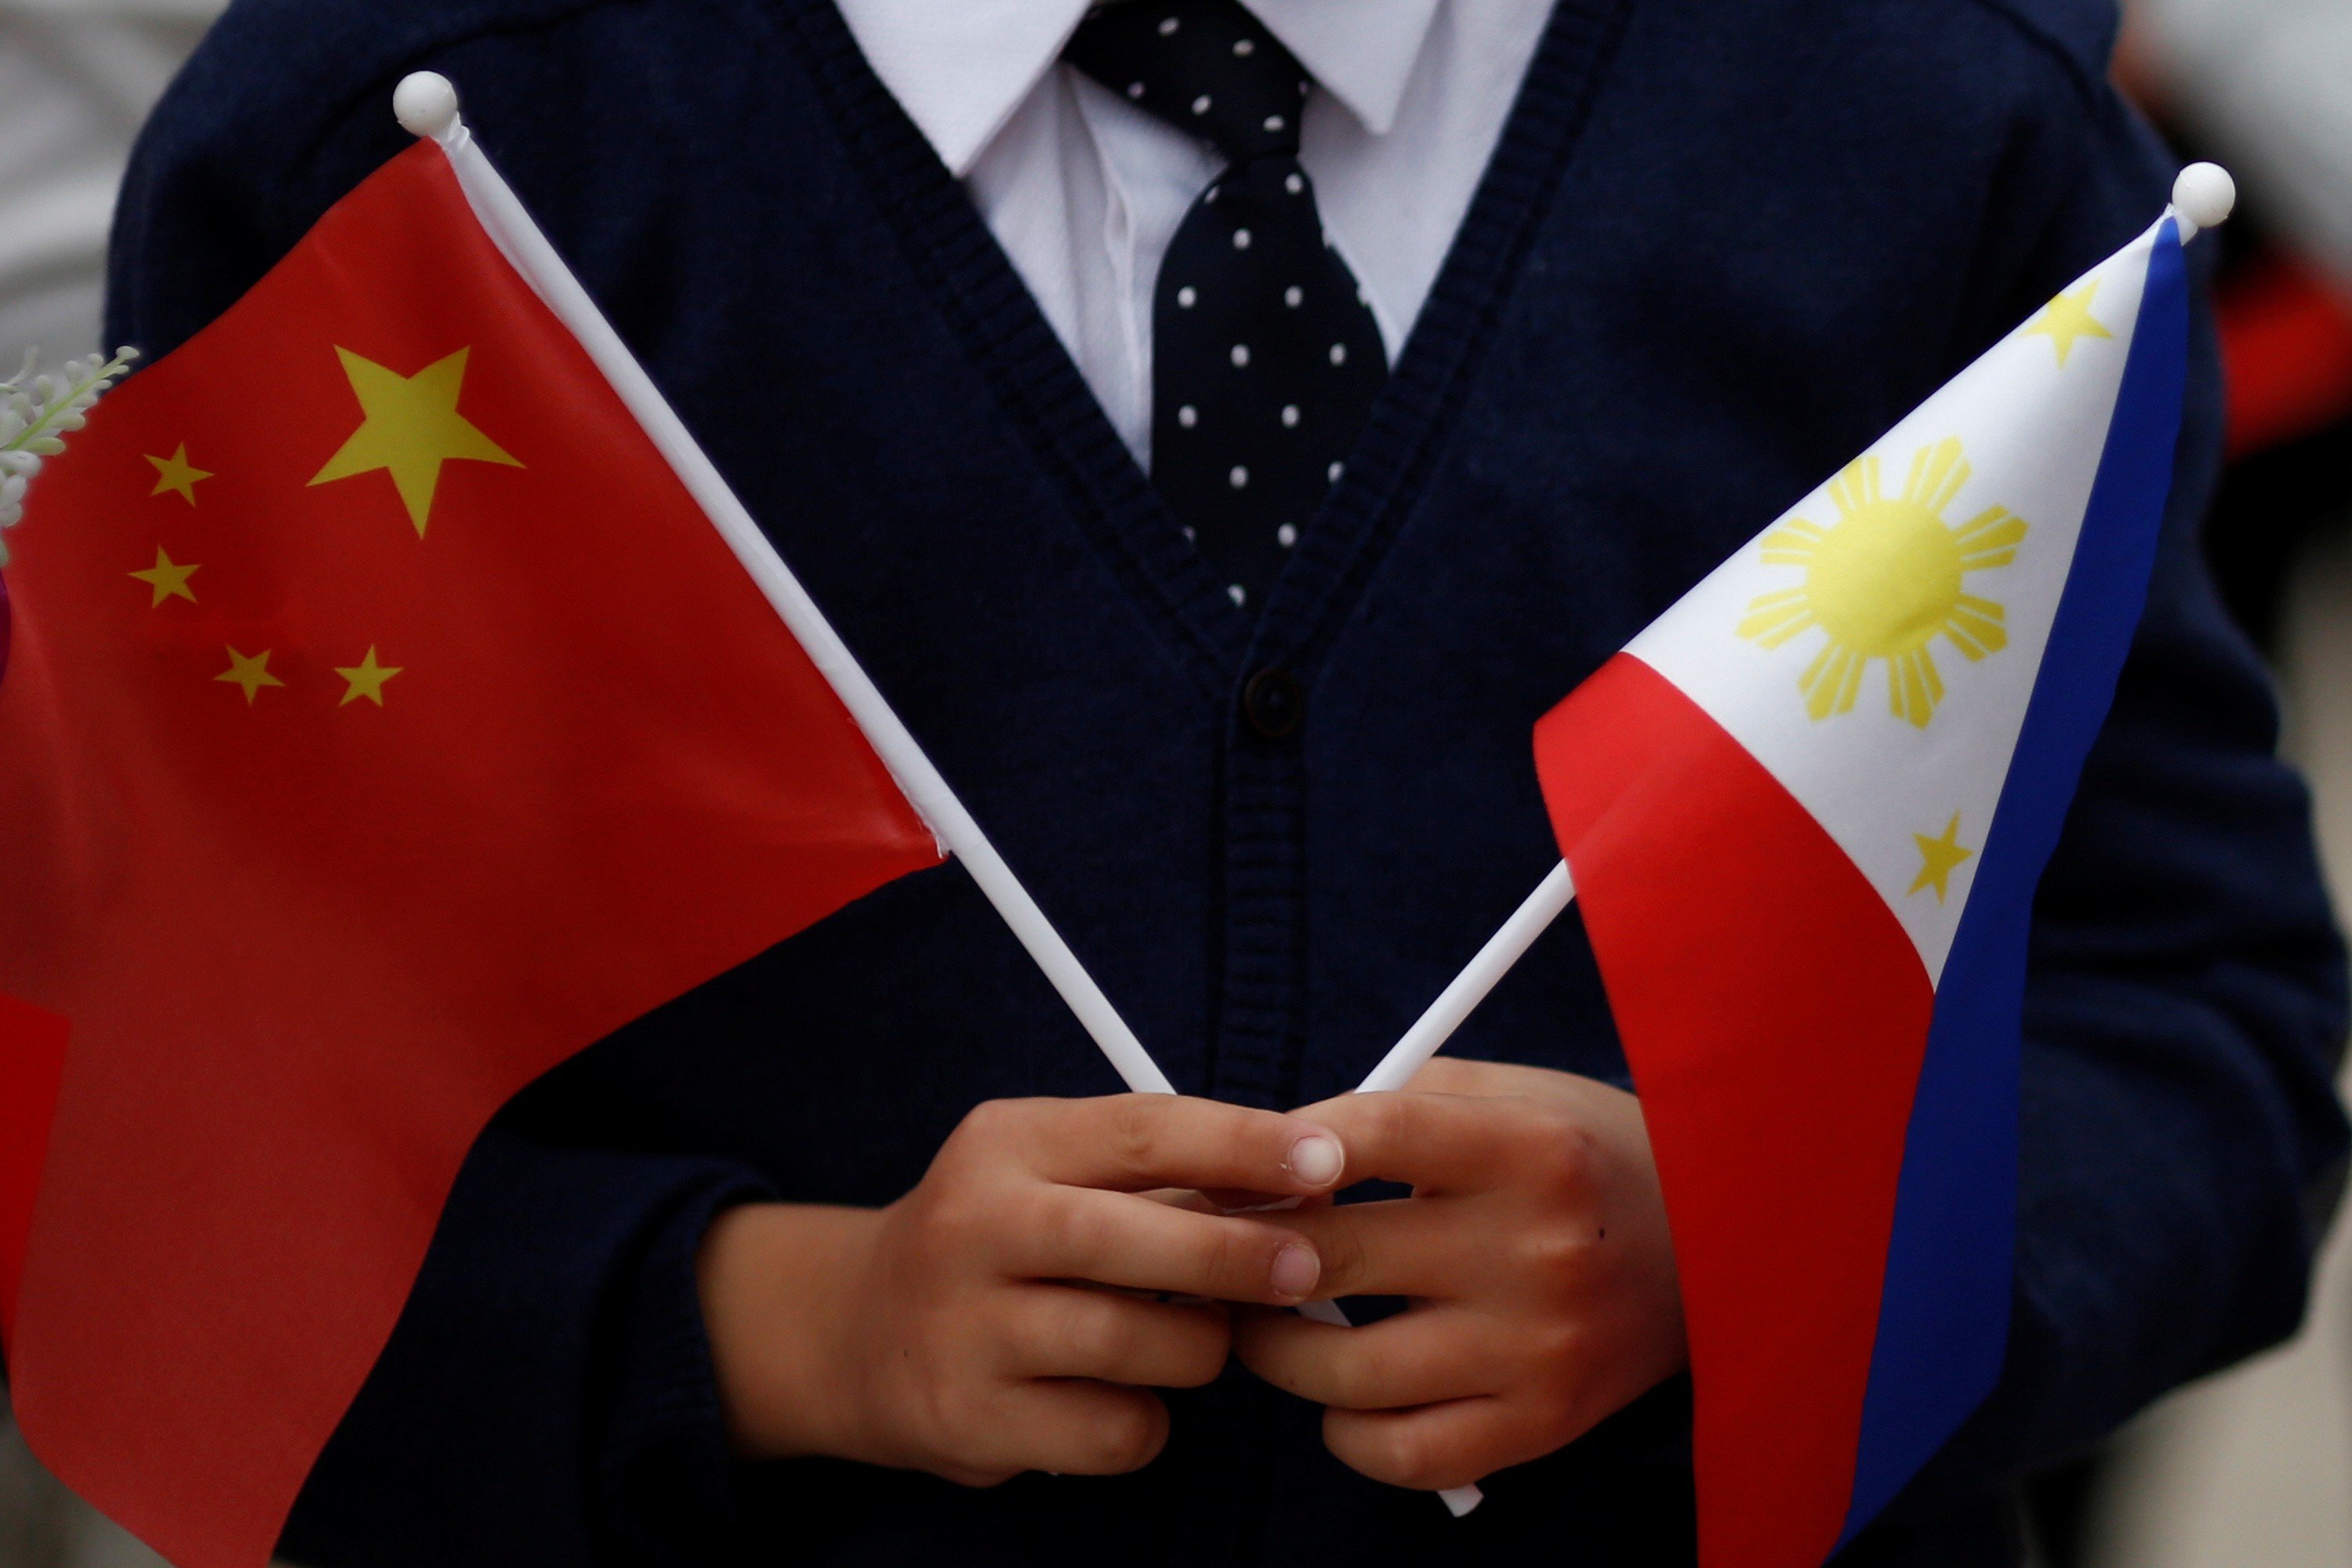 A child holds national flags of China and the Philippines before Philippine President Rodrigo Duterte and China's President Xi Jinping attend a welcoming ceremony in Beijing in October 2016. Photo: Reuters